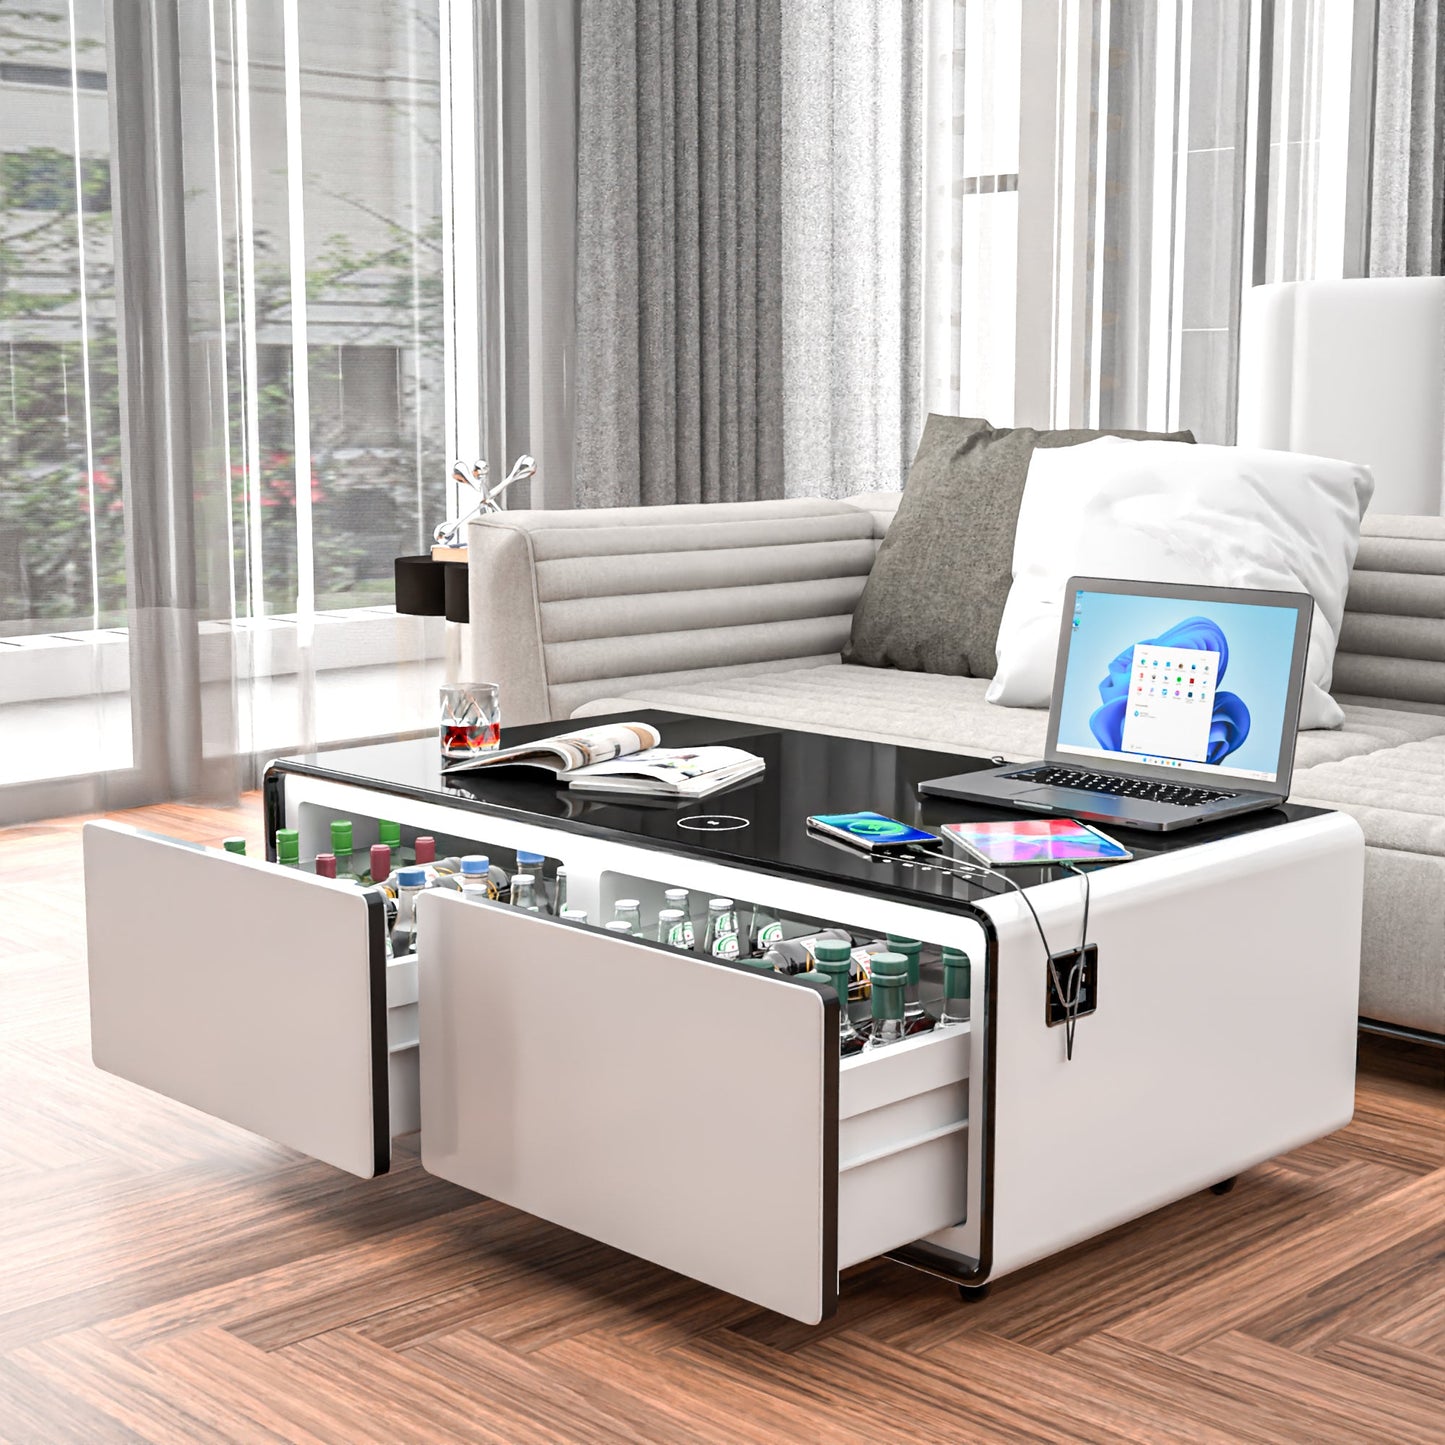 Modern Smart Coffee Table with Built-in Fridge, Bluetooth Speaker, Wireless Charging Module, Touch Control Panel, Power Socket, USB Interface, Outlet Protection, Atmosphere light, White